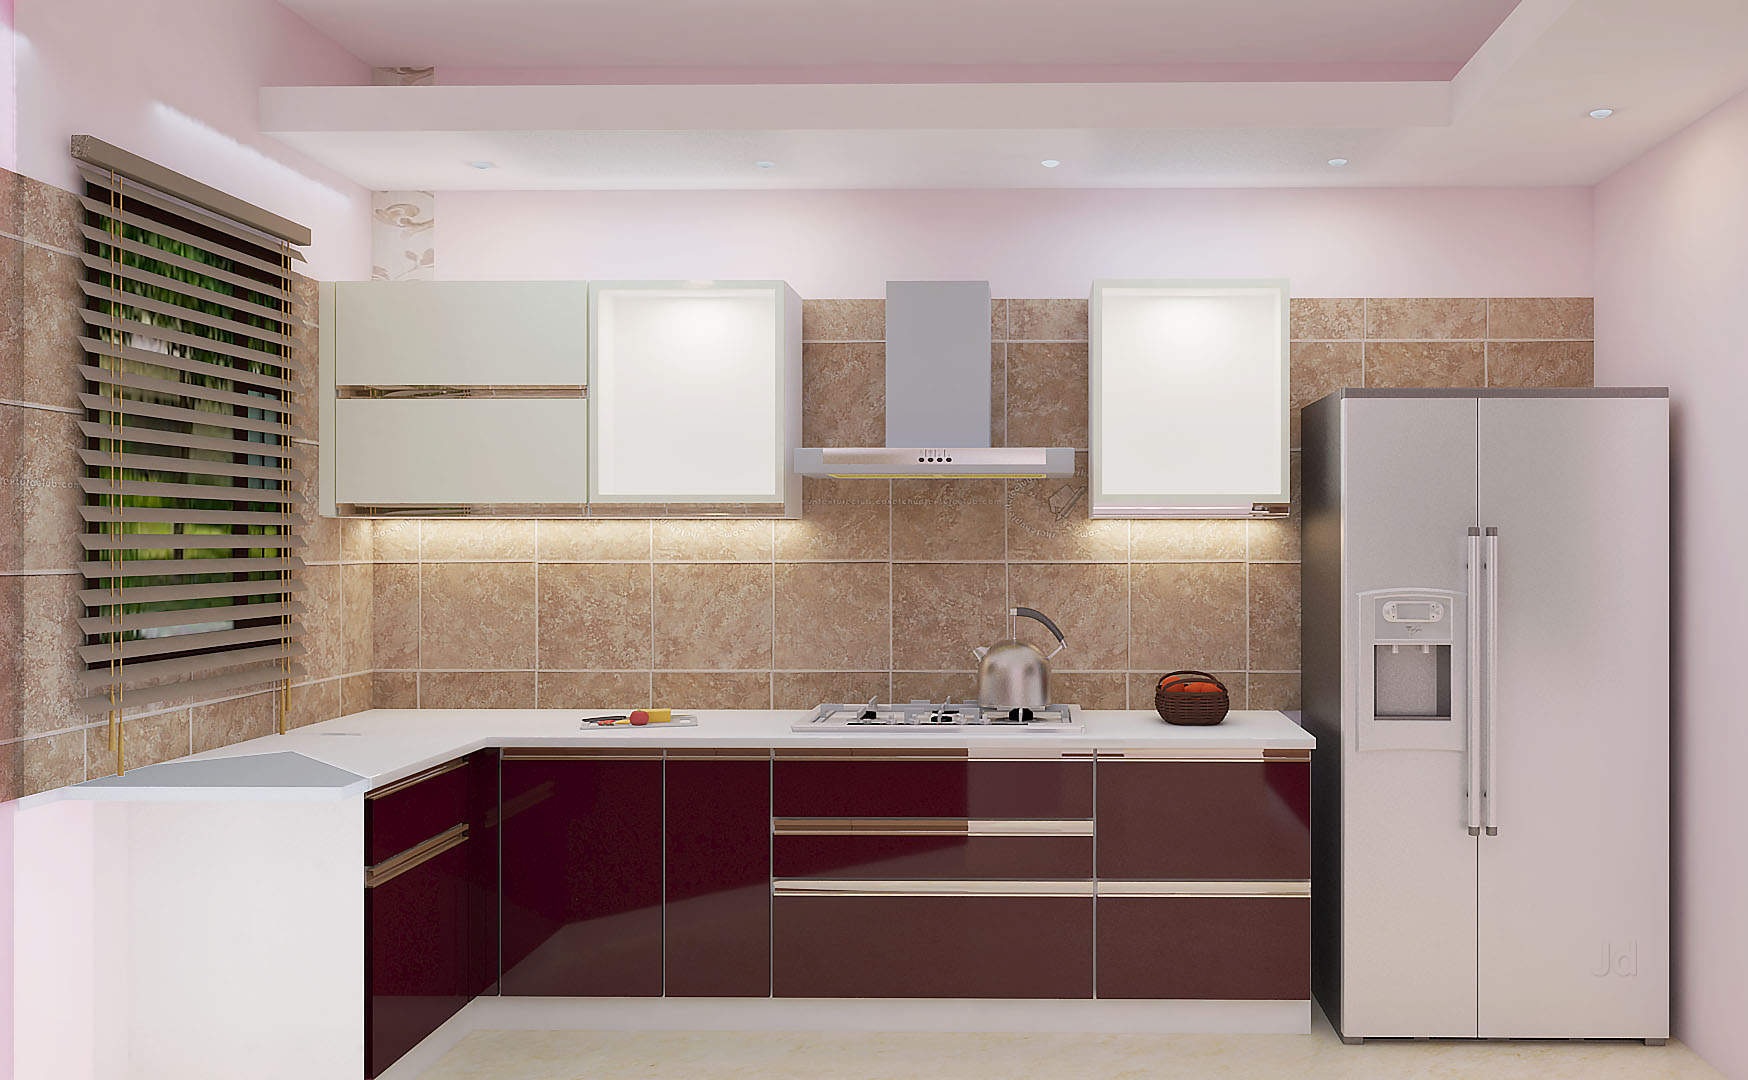 What is the Speciality of a Modular Kitchen? - home and house designs